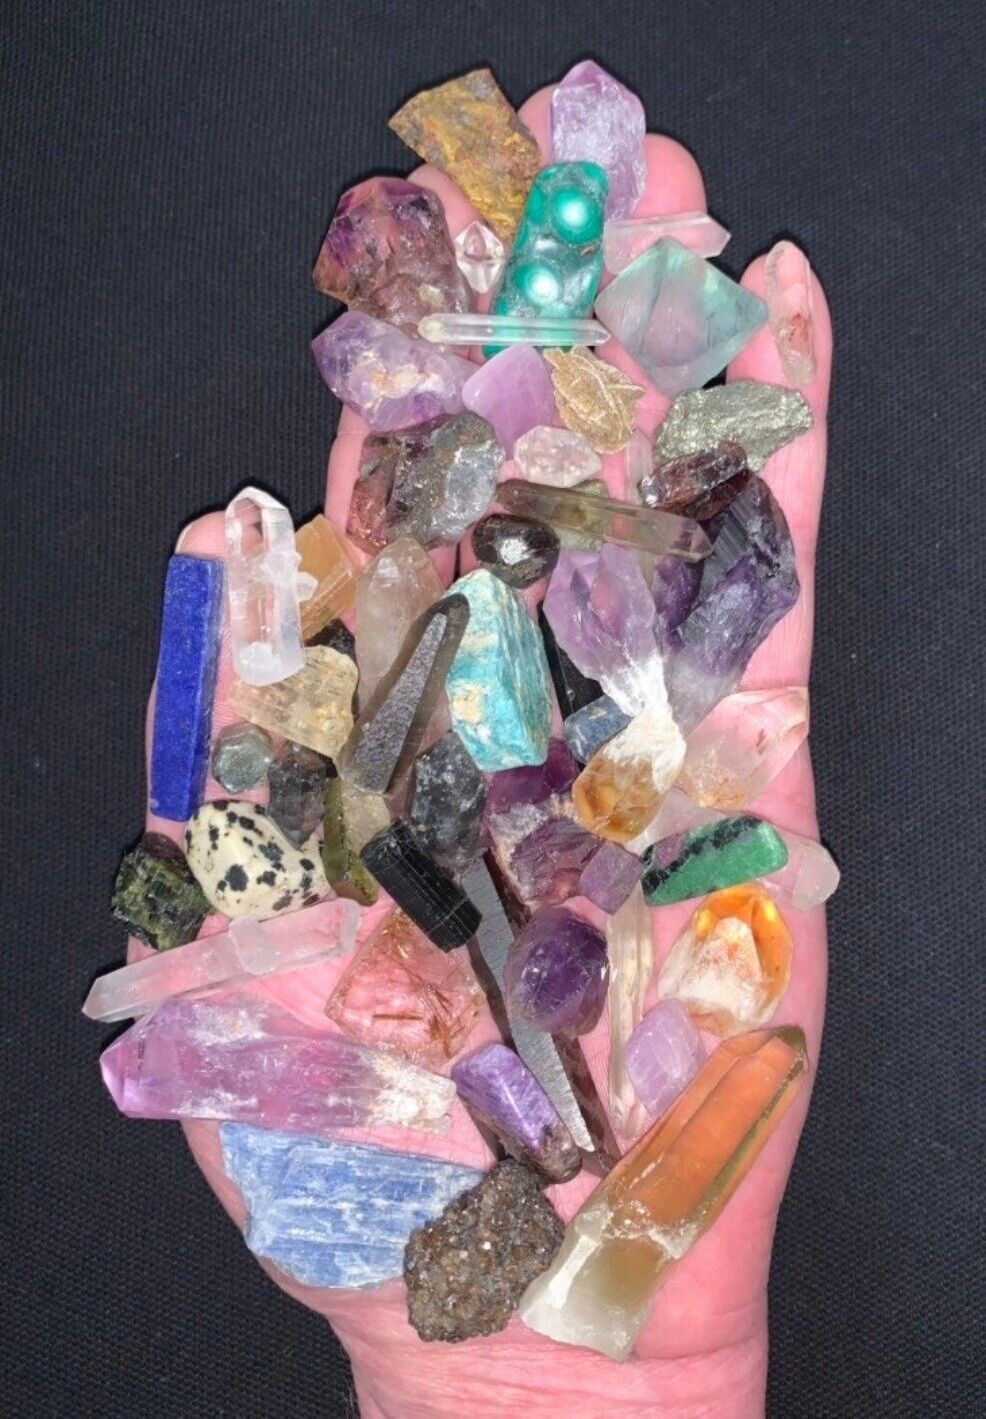 Tiny Crystal and Mineral Lot, Assorted Mixed Crystals and Minerals US Shipping